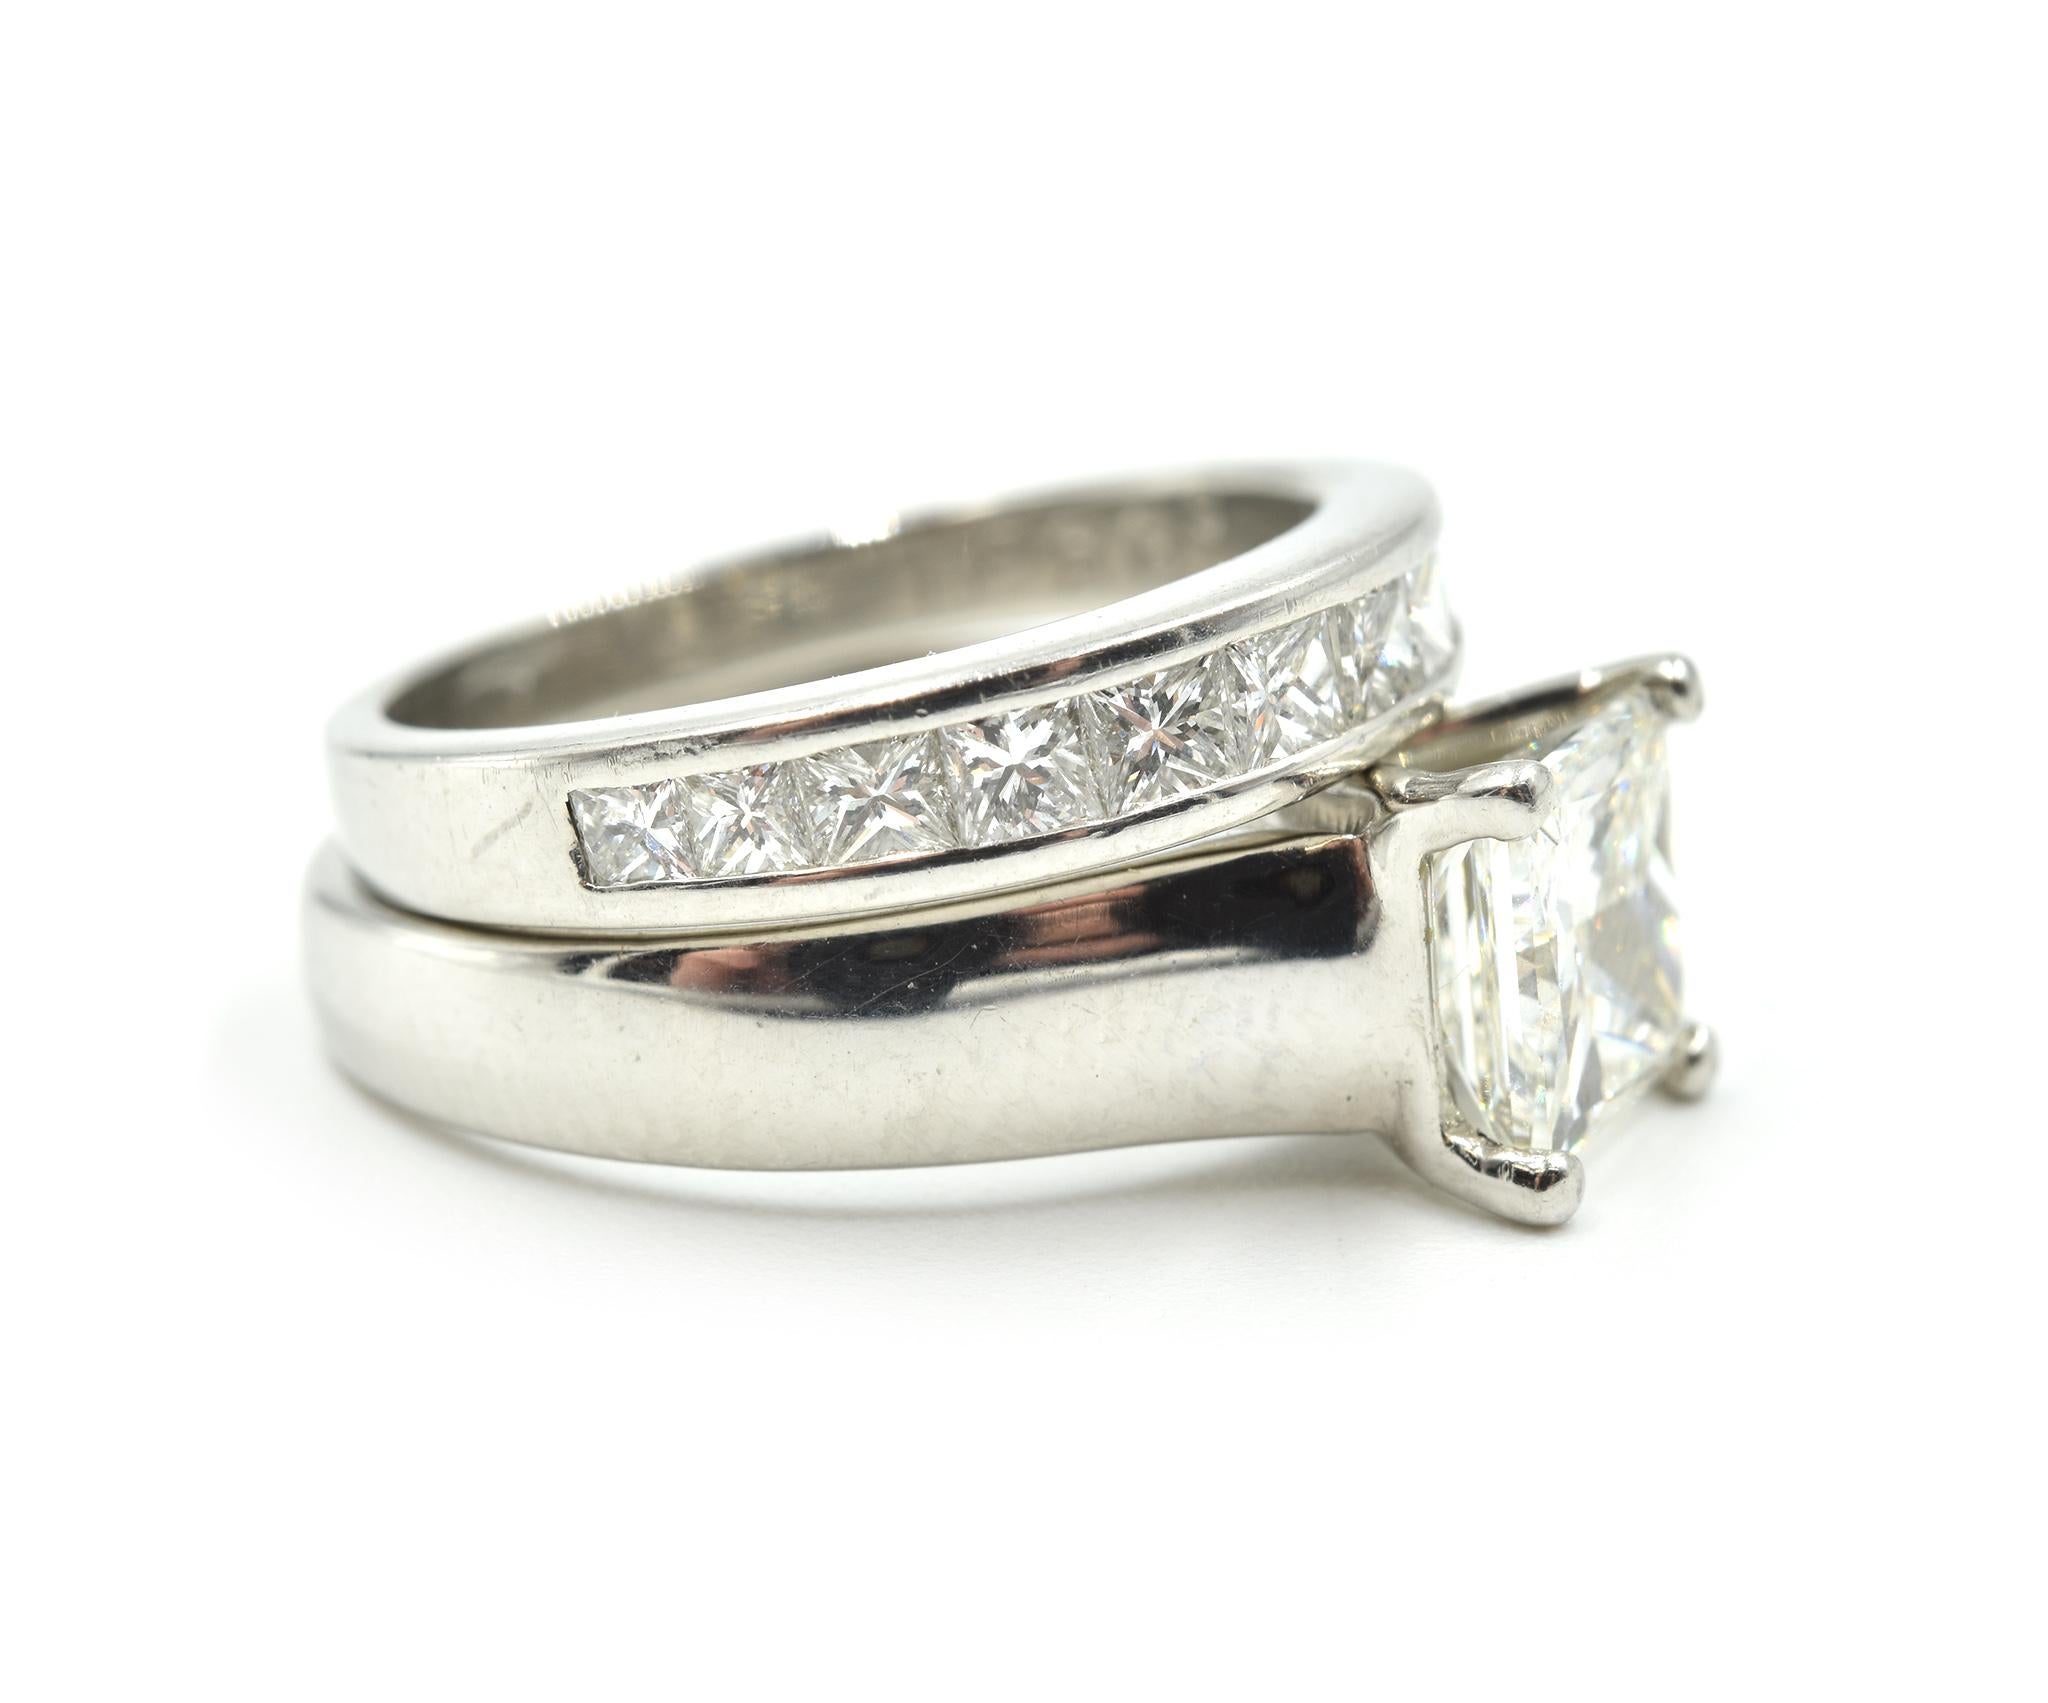 This wedding set features a princess cut center diamond in a sensational platinum mounting, with a stunning princess cut wedding band. The center princess cut diamond weighs 1.25 carats, and the diamond is graded I in color and VS1 in clarity. The